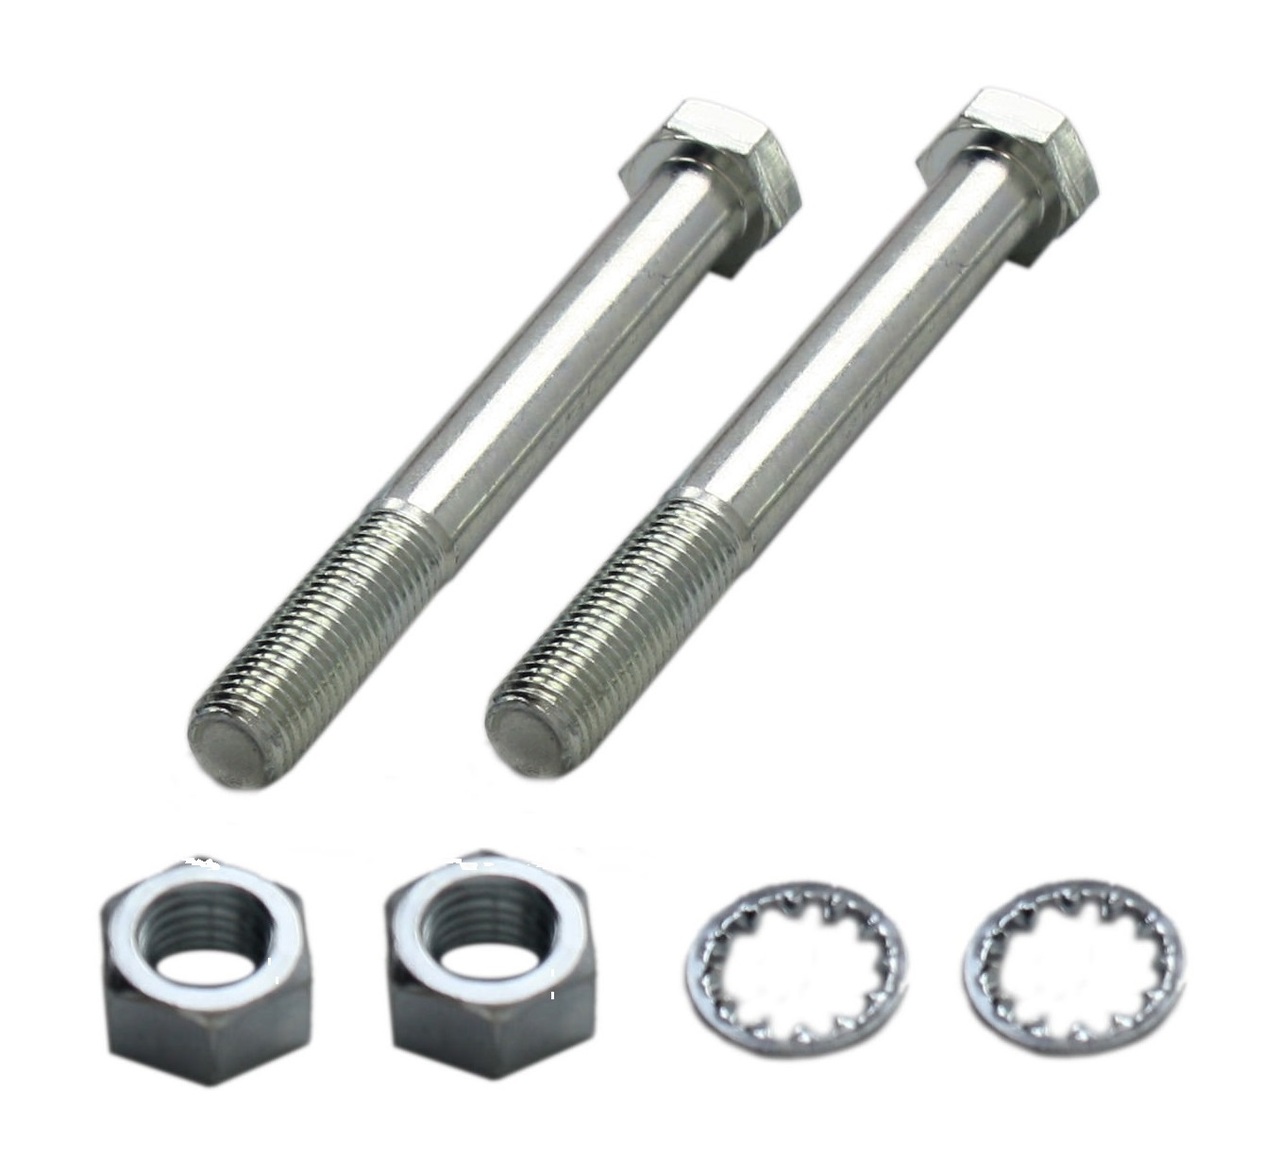 & 75mm Long Bolts Nyloc Nuts & Washers 38MM Tow Bar Towball Spacer  1.5" 